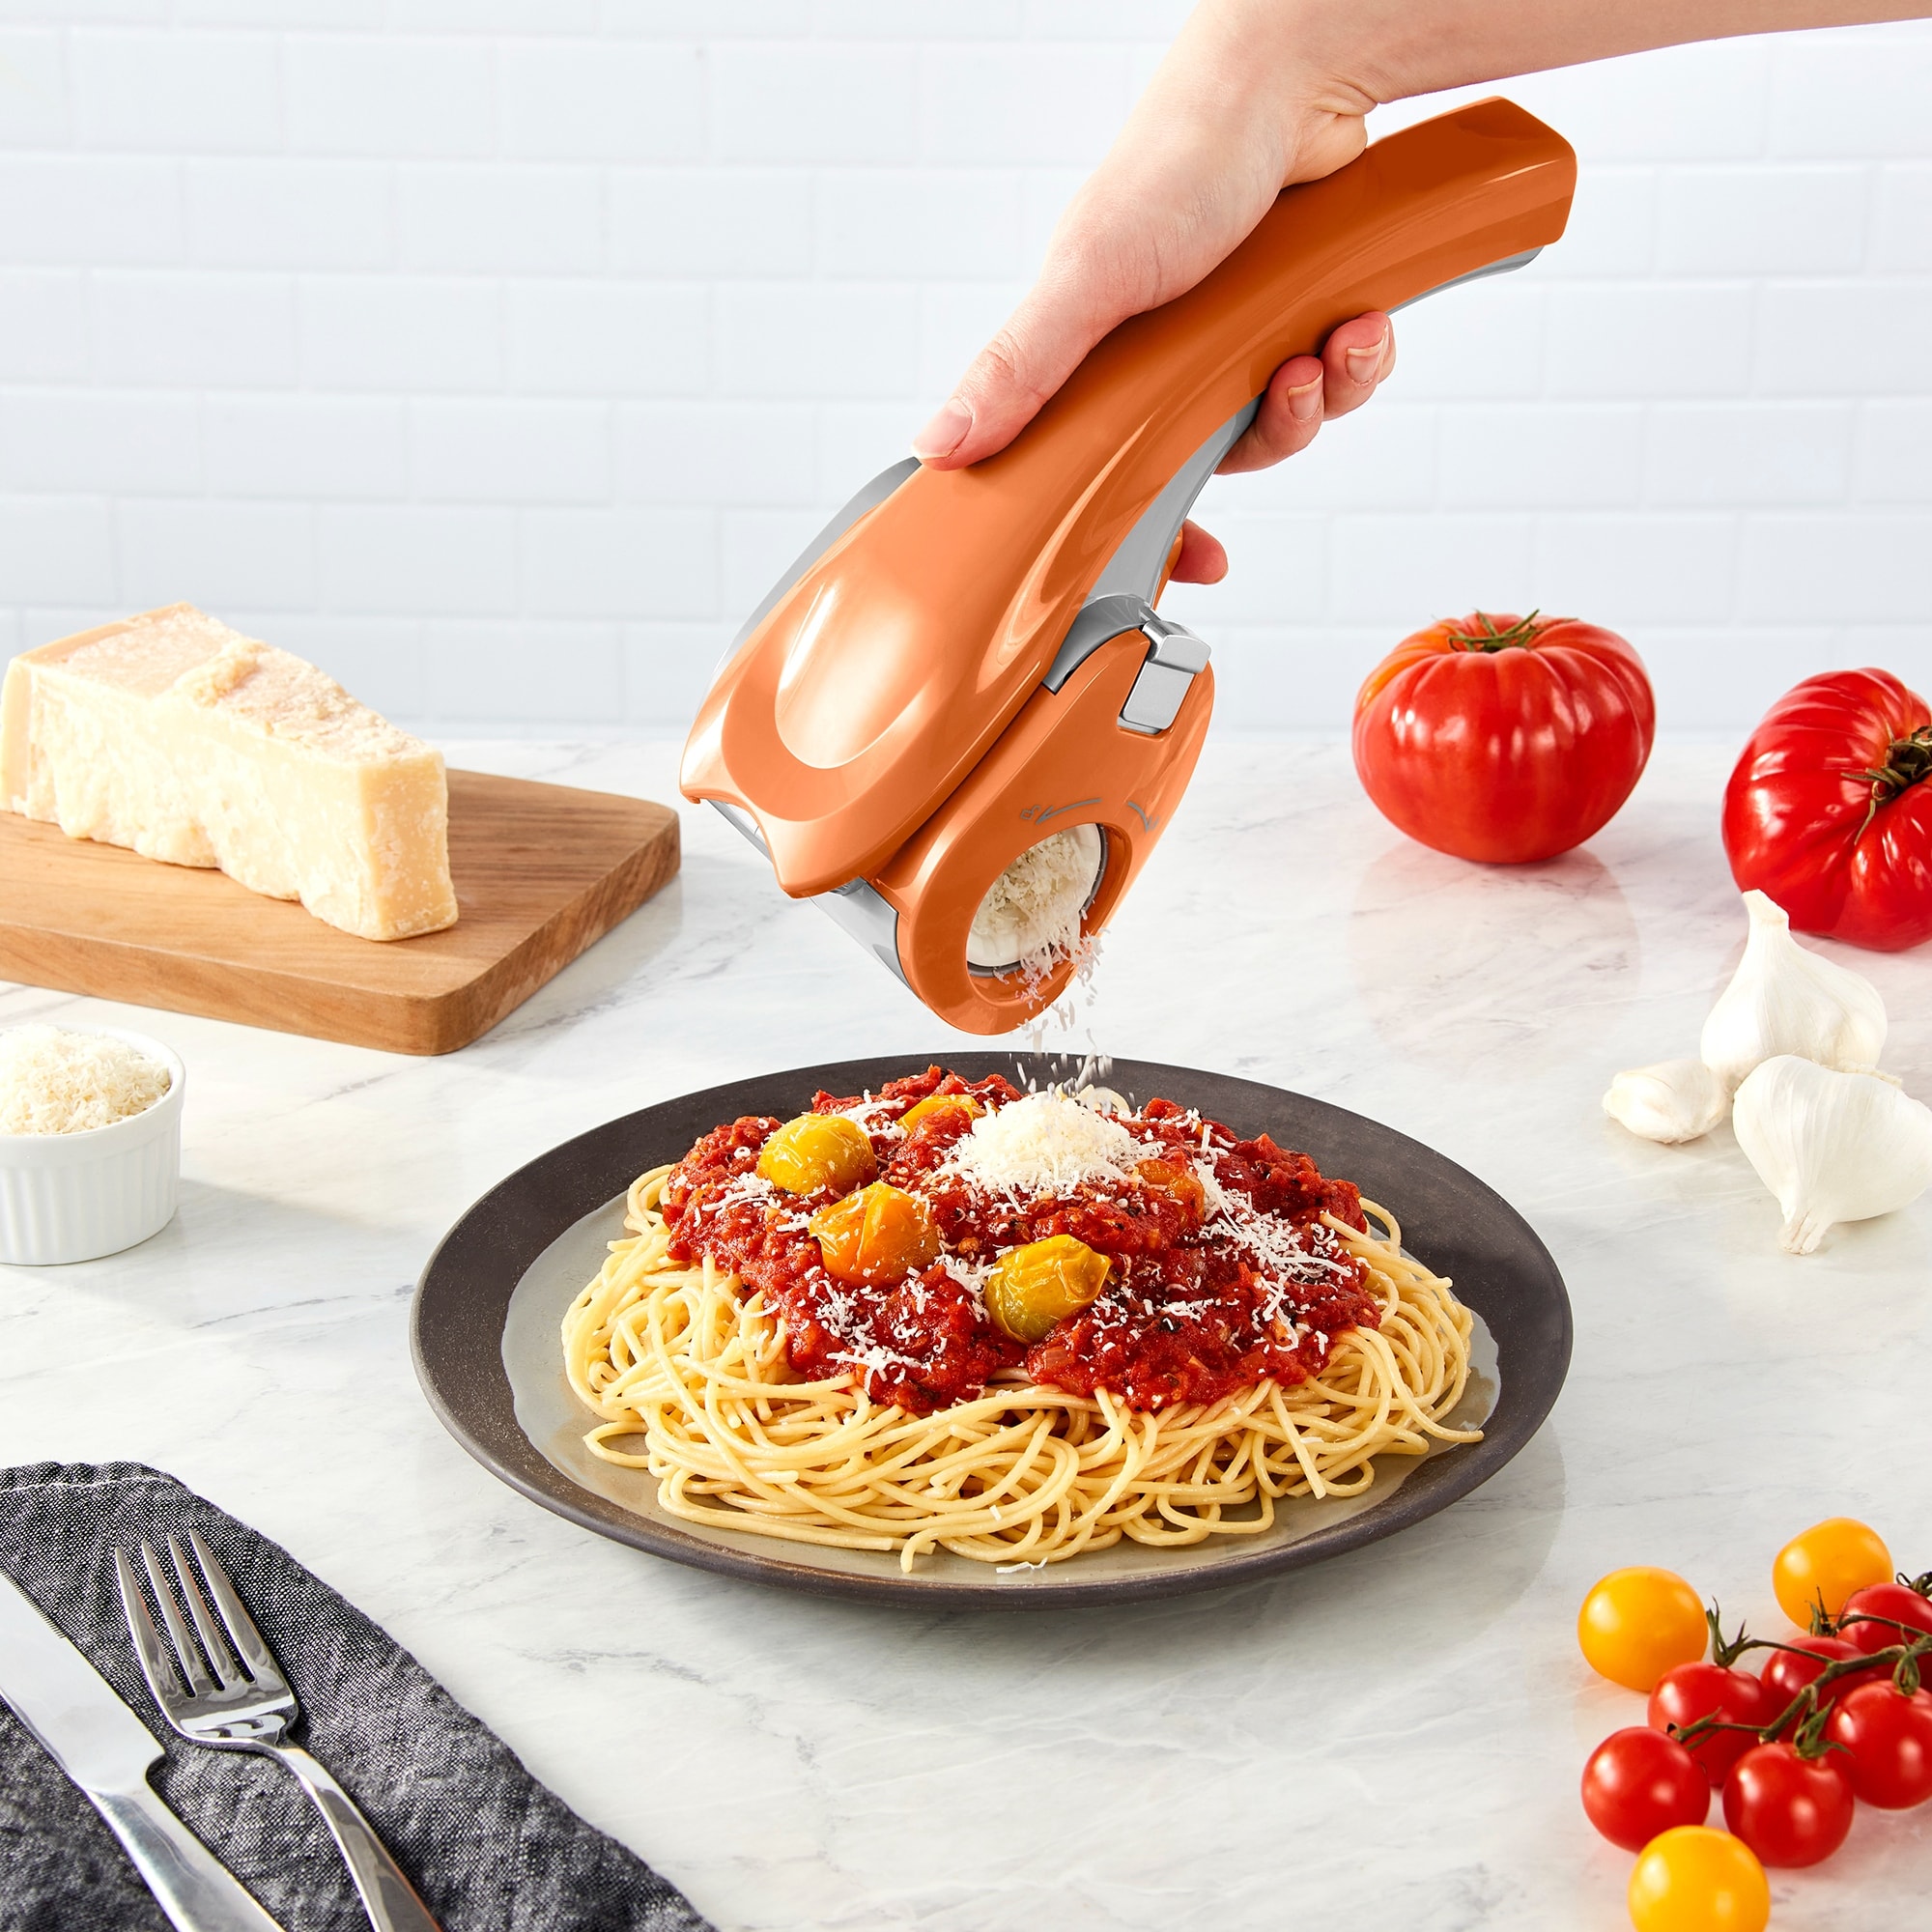 https://ak1.ostkcdn.com/images/products/is/images/direct/d09925d062fb79f8ca690b2c55722574d3ab4ae8/Rechargeable-Electric-Rotary-Grater.jpg